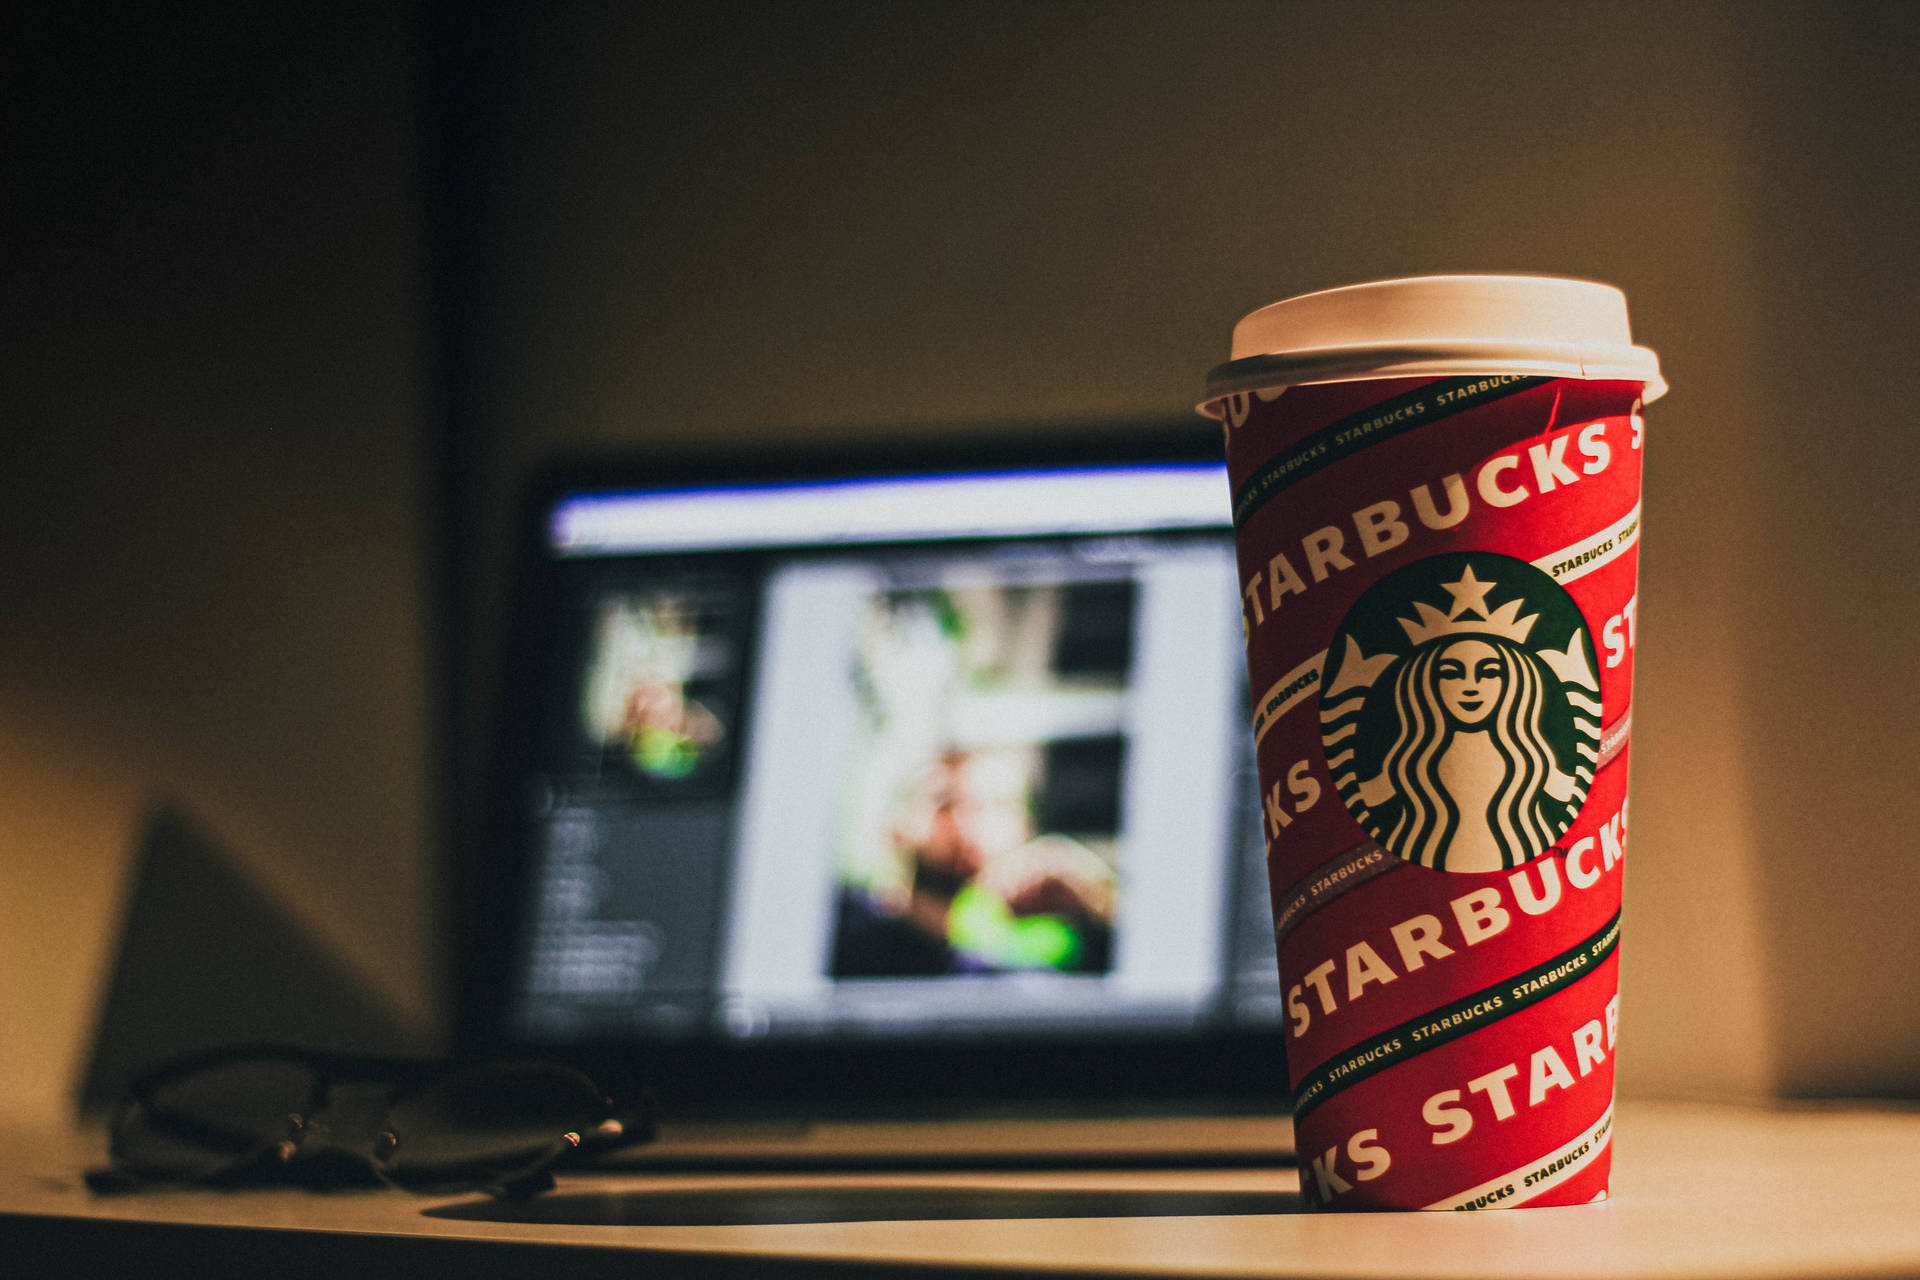 Editing Software And Starbucks Cup Background